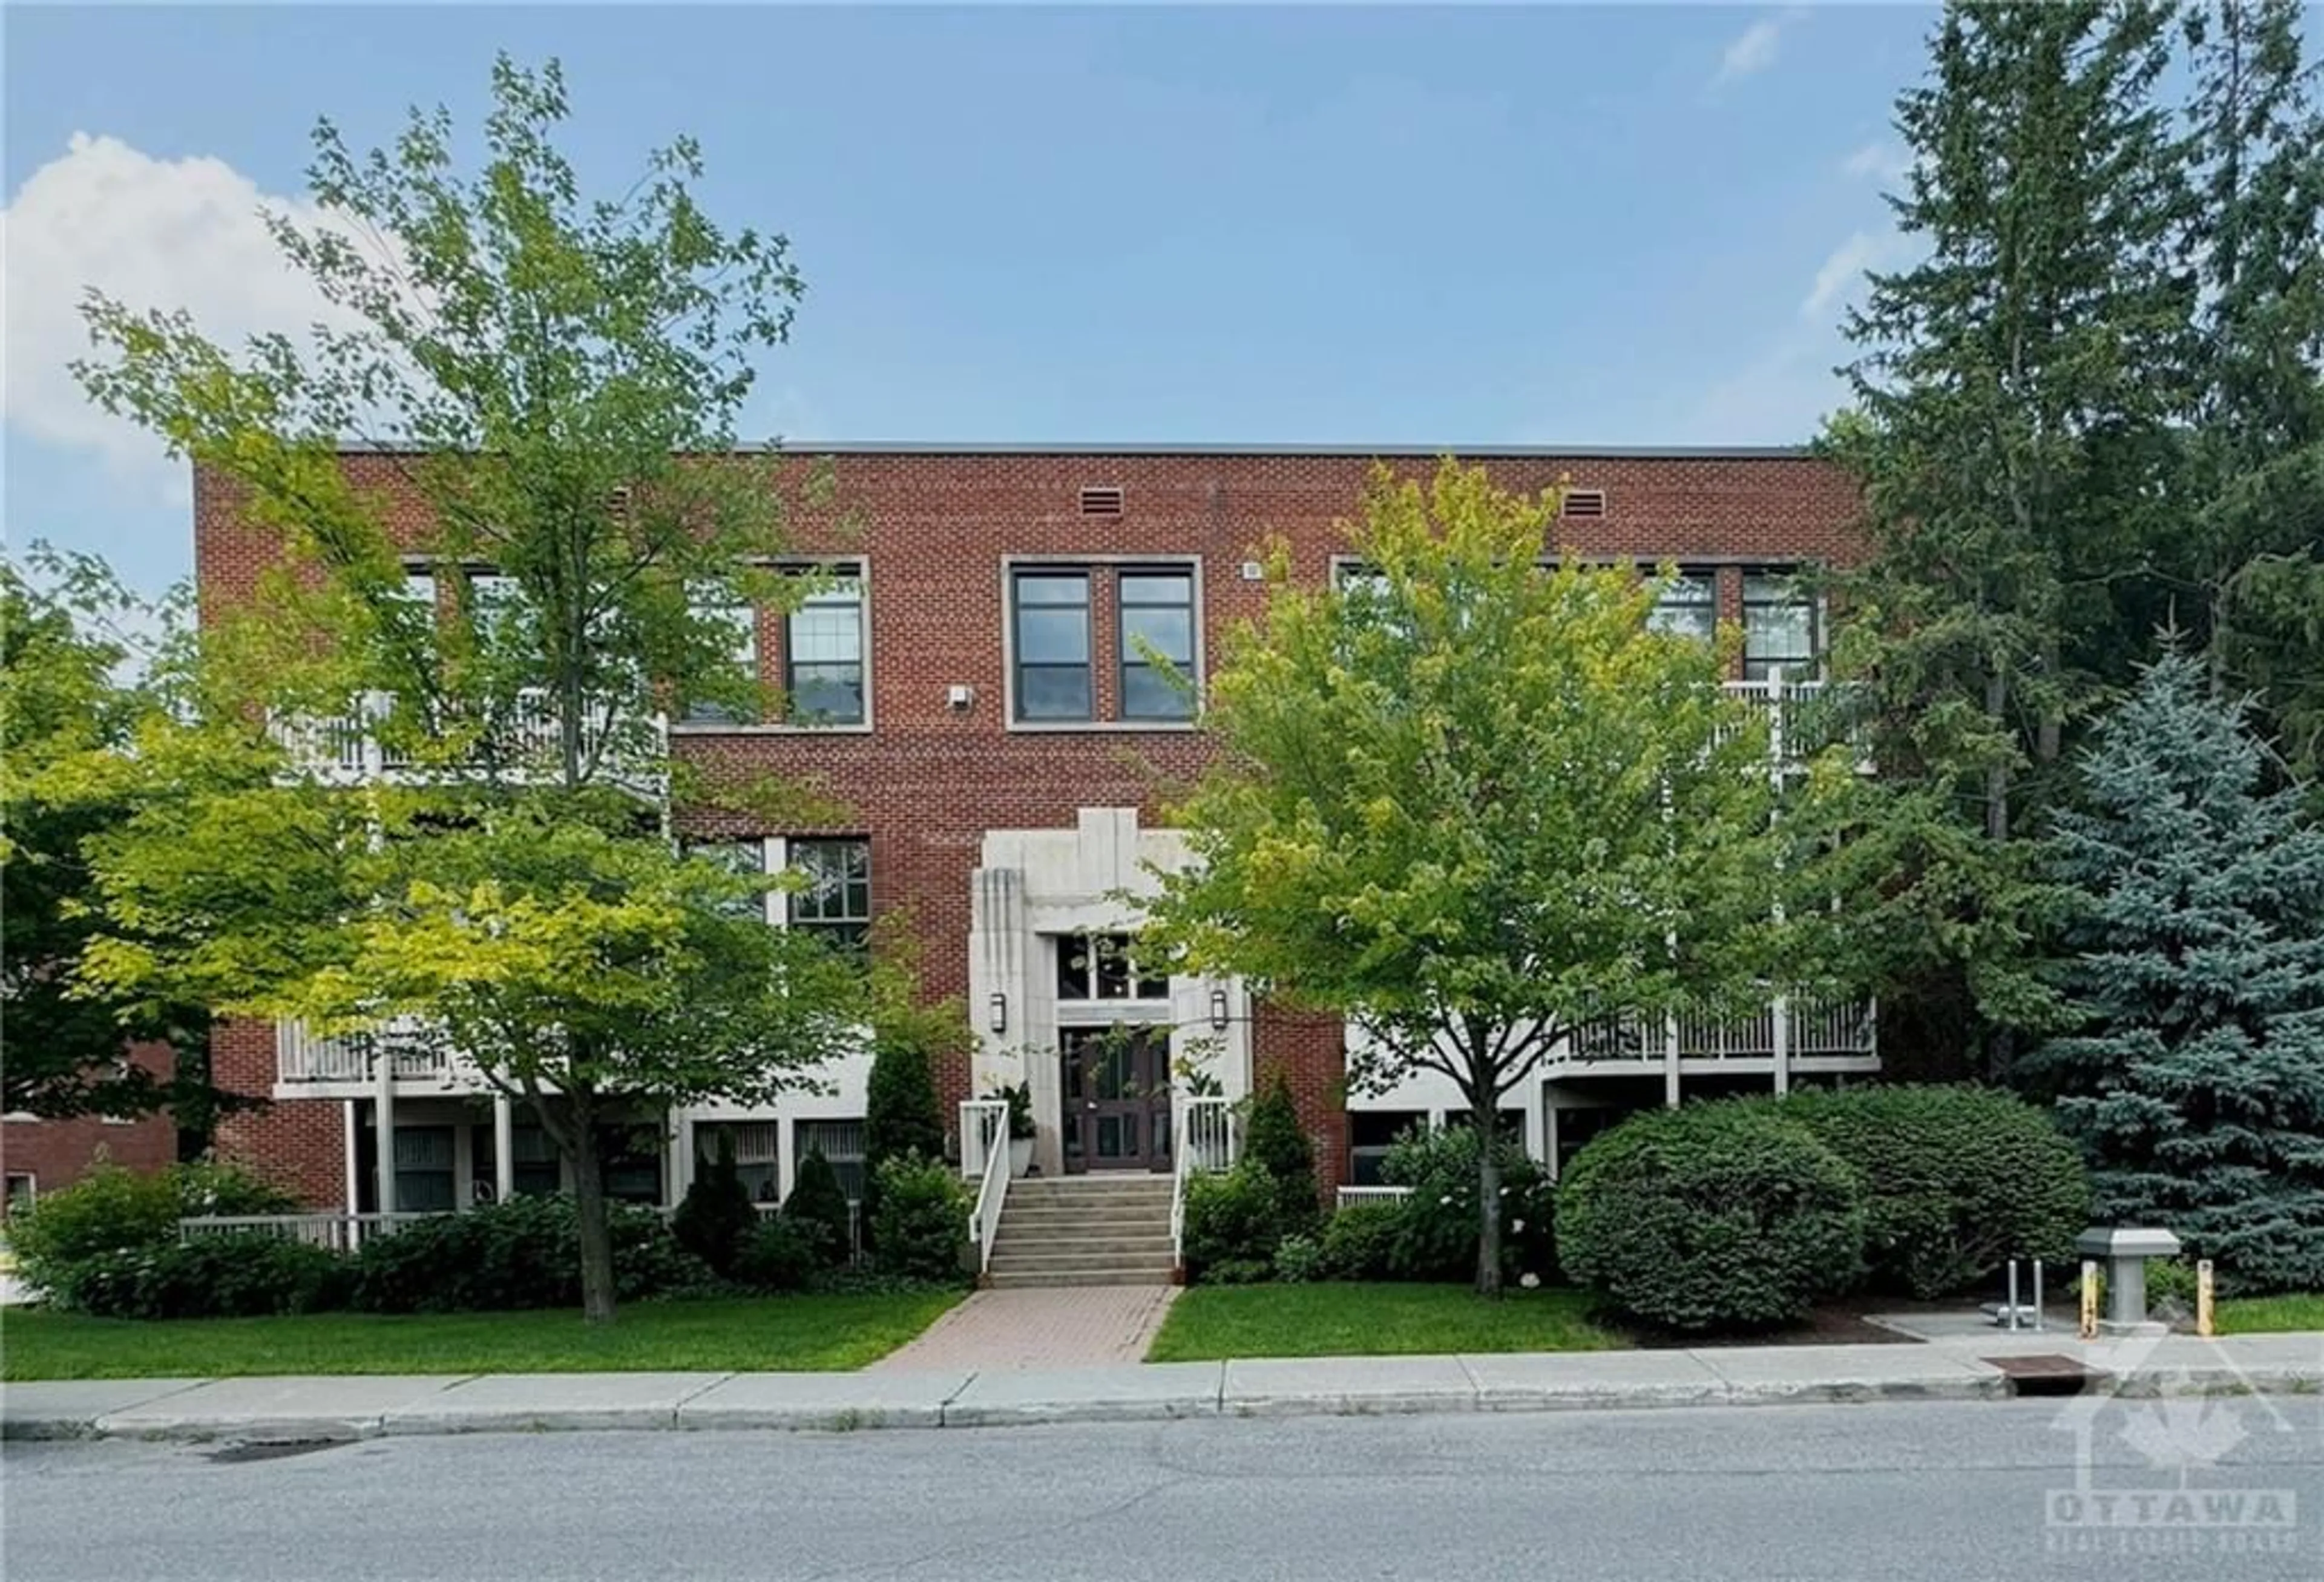 Outside view for 174 STANLEY Ave #103, Ottawa Ontario K1M 1P1